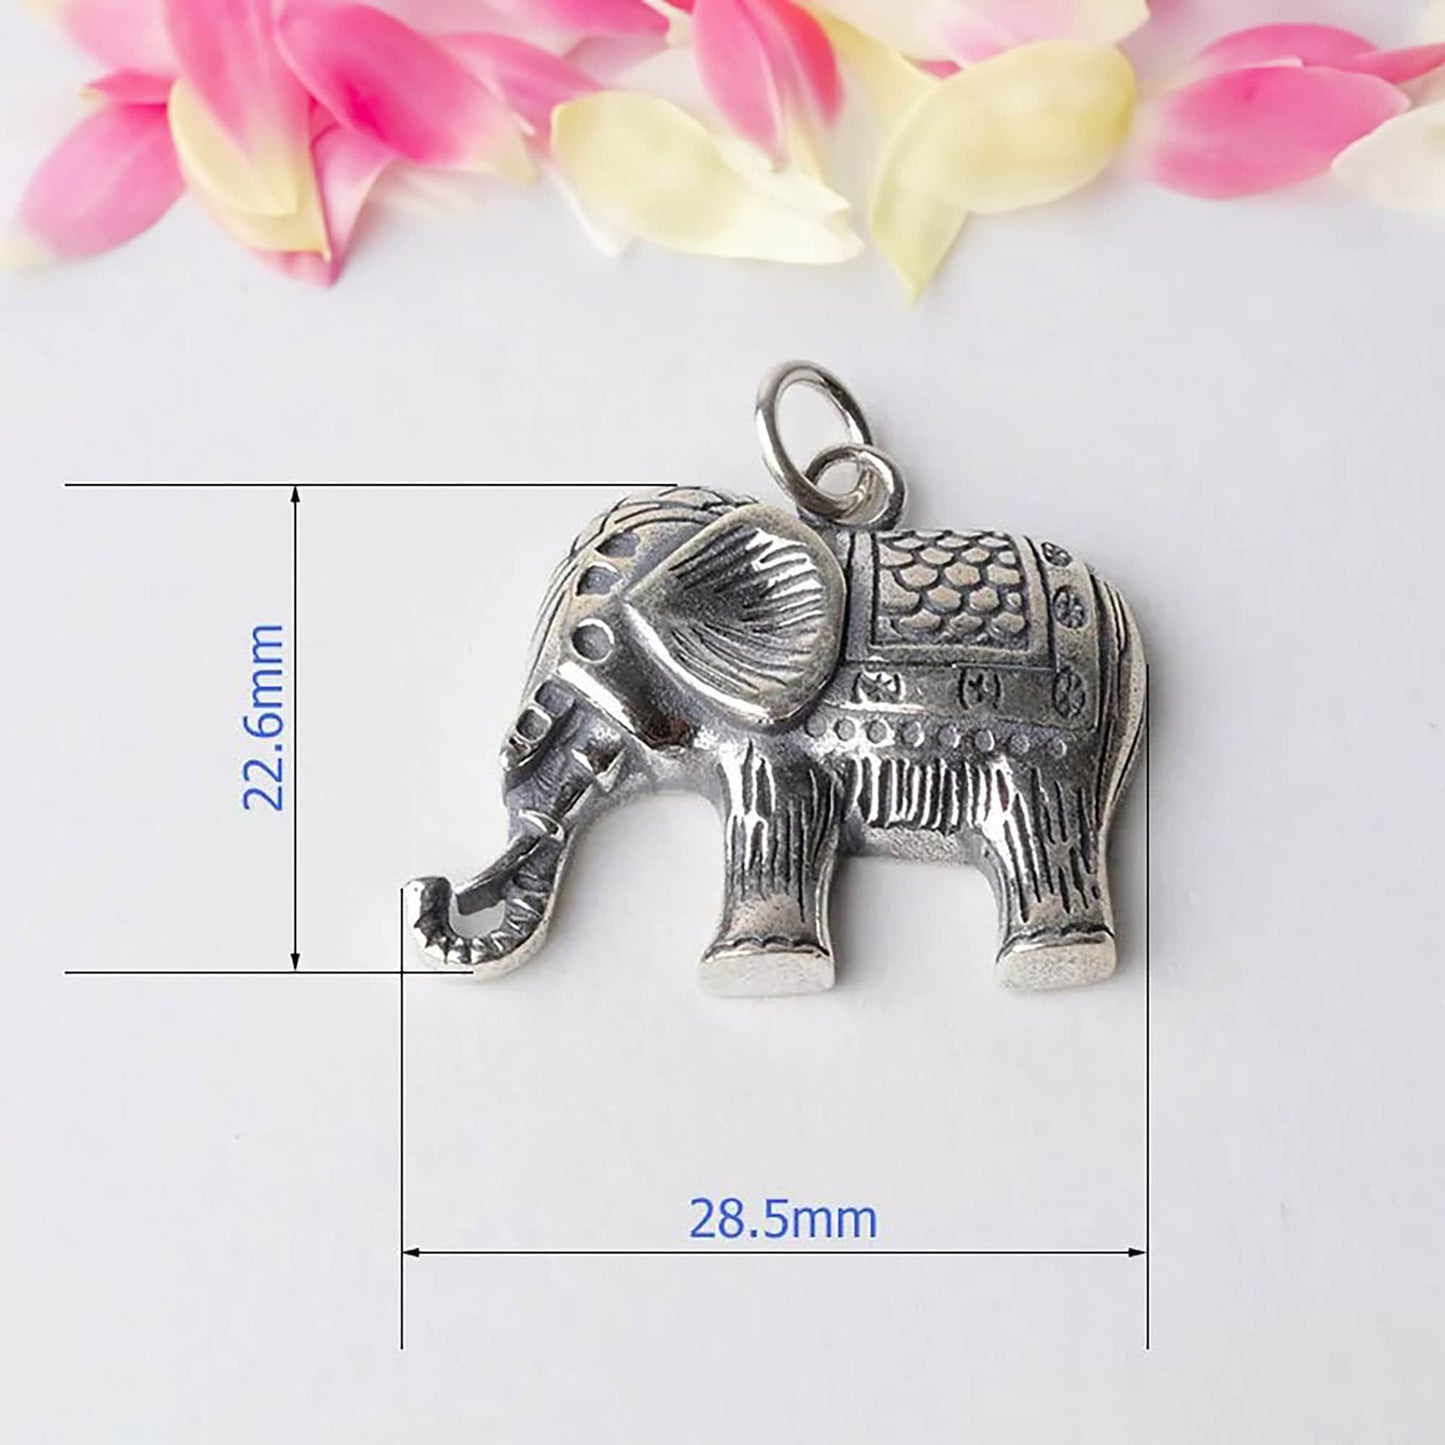 Solid 925 Sterling Silver 3D Elephant Spacer Bead Necklace Charms, Pendant Jewelry Making Supplies, Antique Silver Charm, Elephant Finding